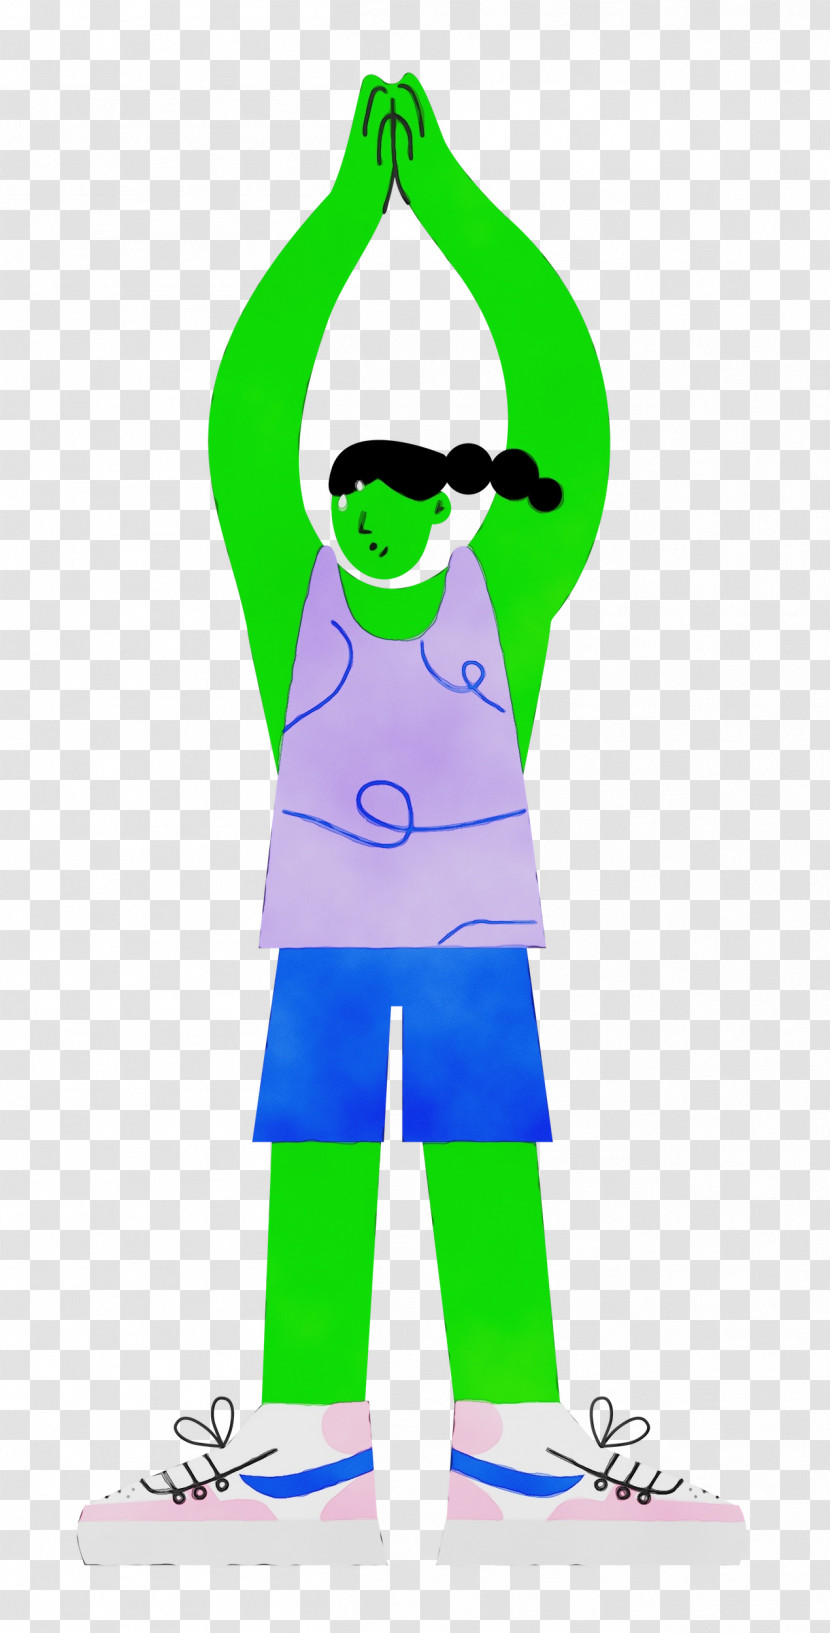 Sports Equipment Cartoon Character Outerwear / M Costume Transparent PNG